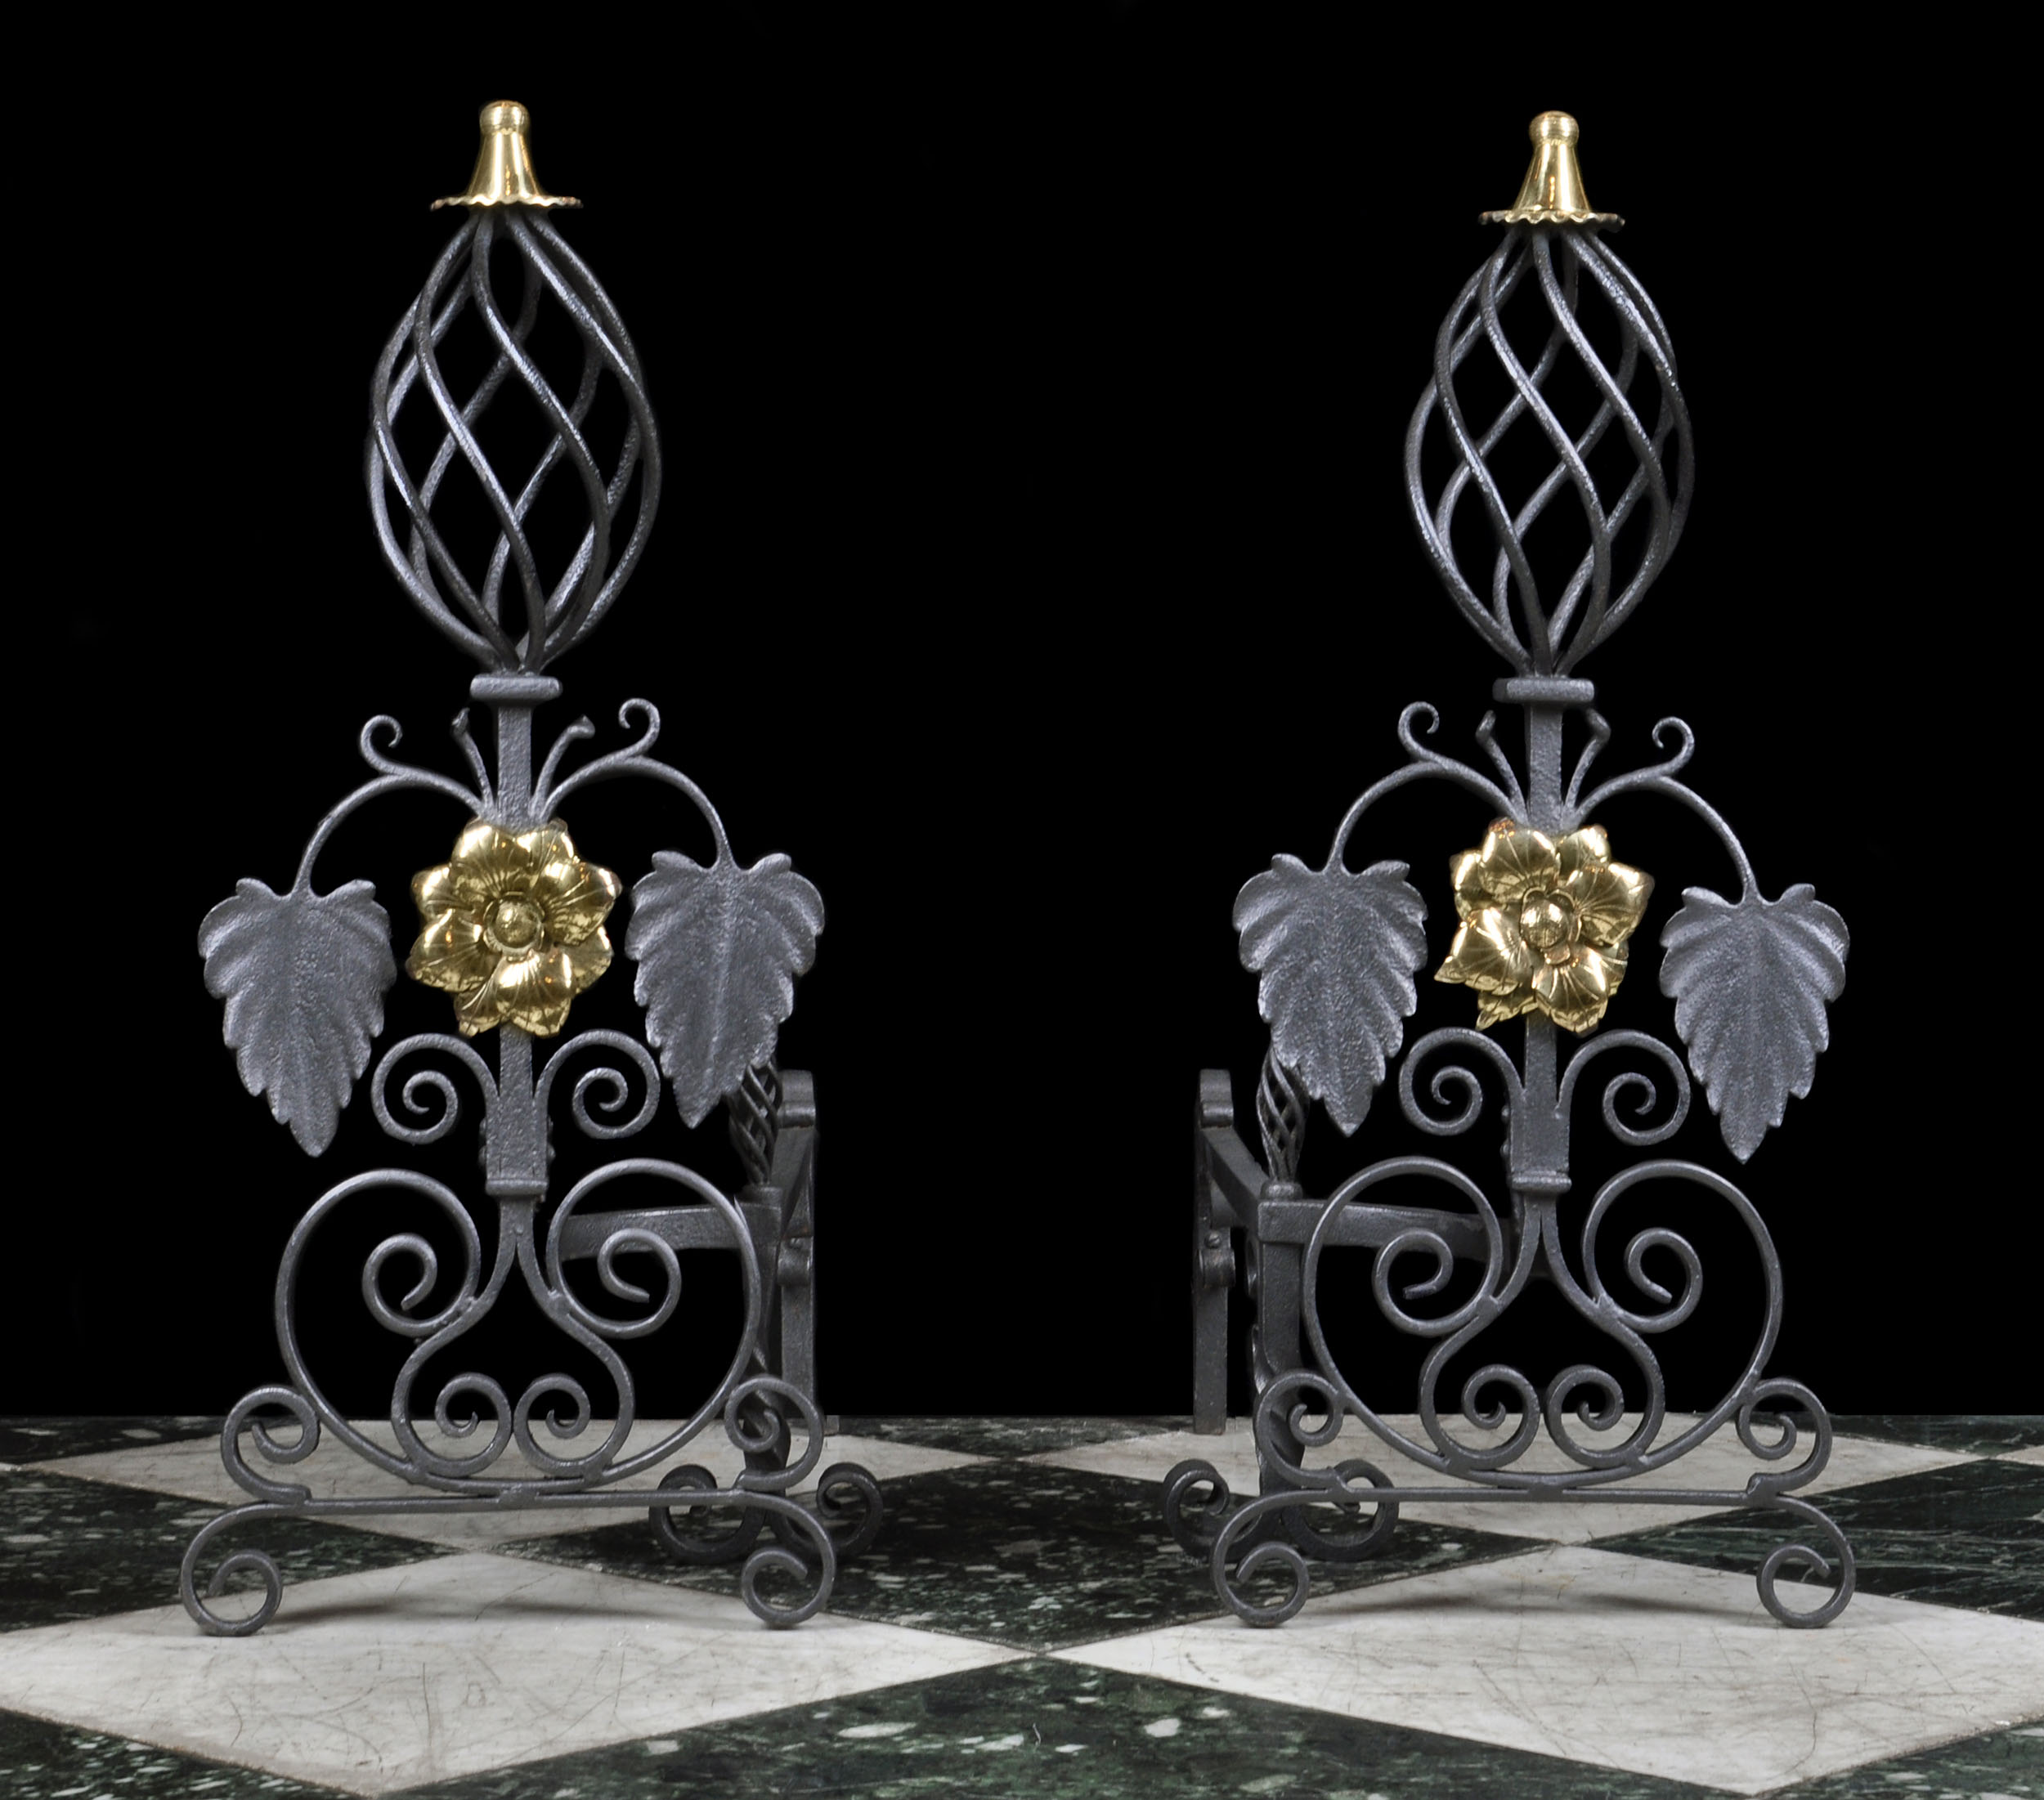 A Pair of Wrought Iron & Brass Andirons